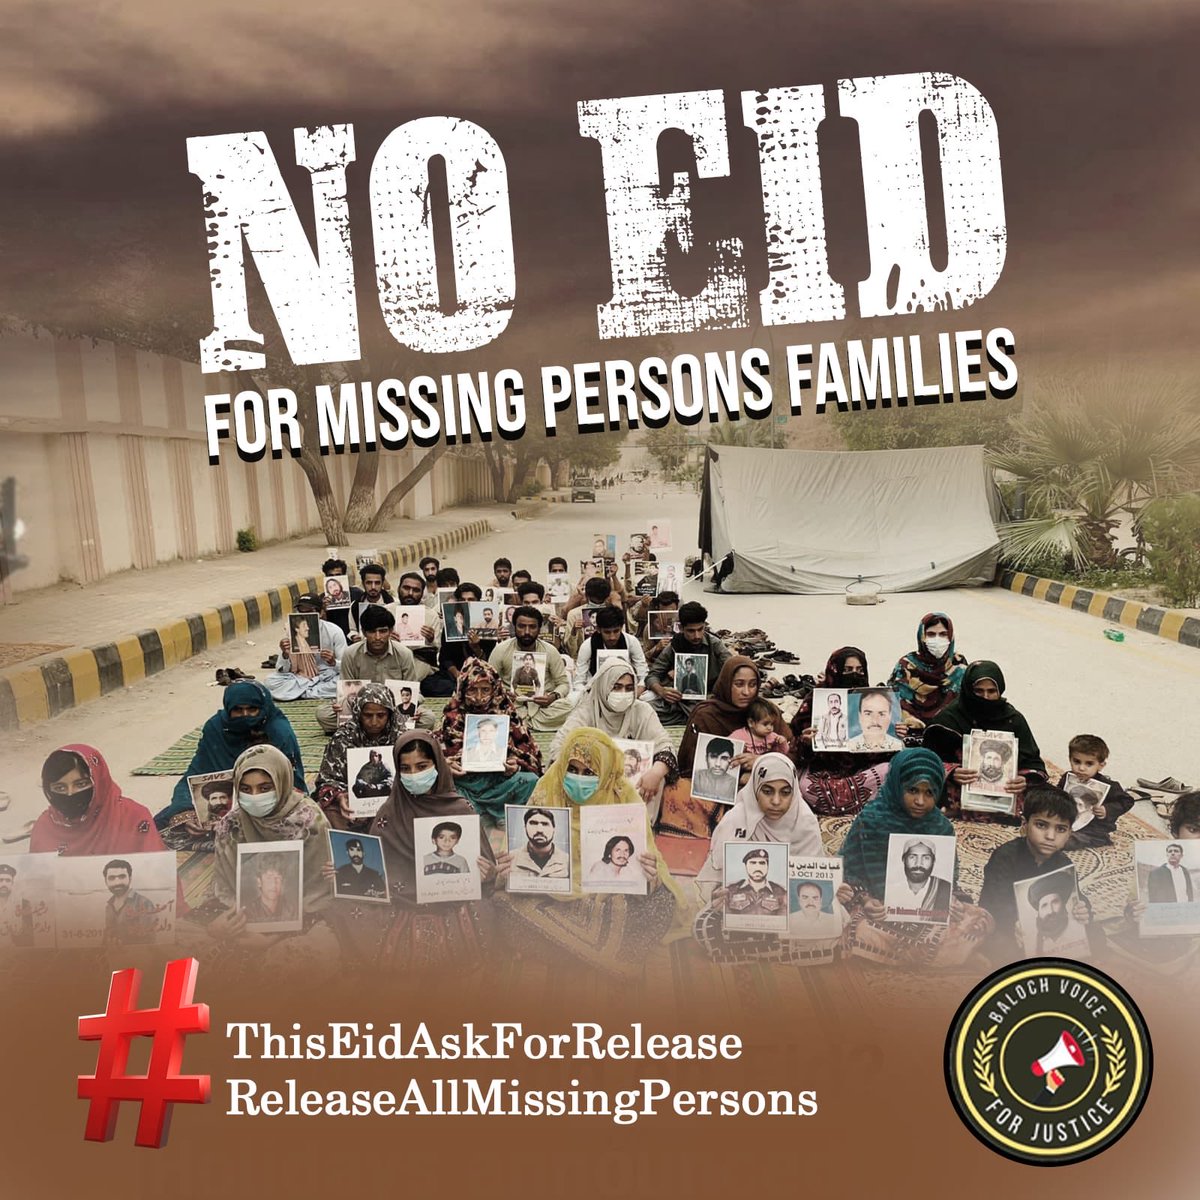 No Eid For Missing Persons Families #ThisEidAskForRelease #ReleaseAllMissingPersons